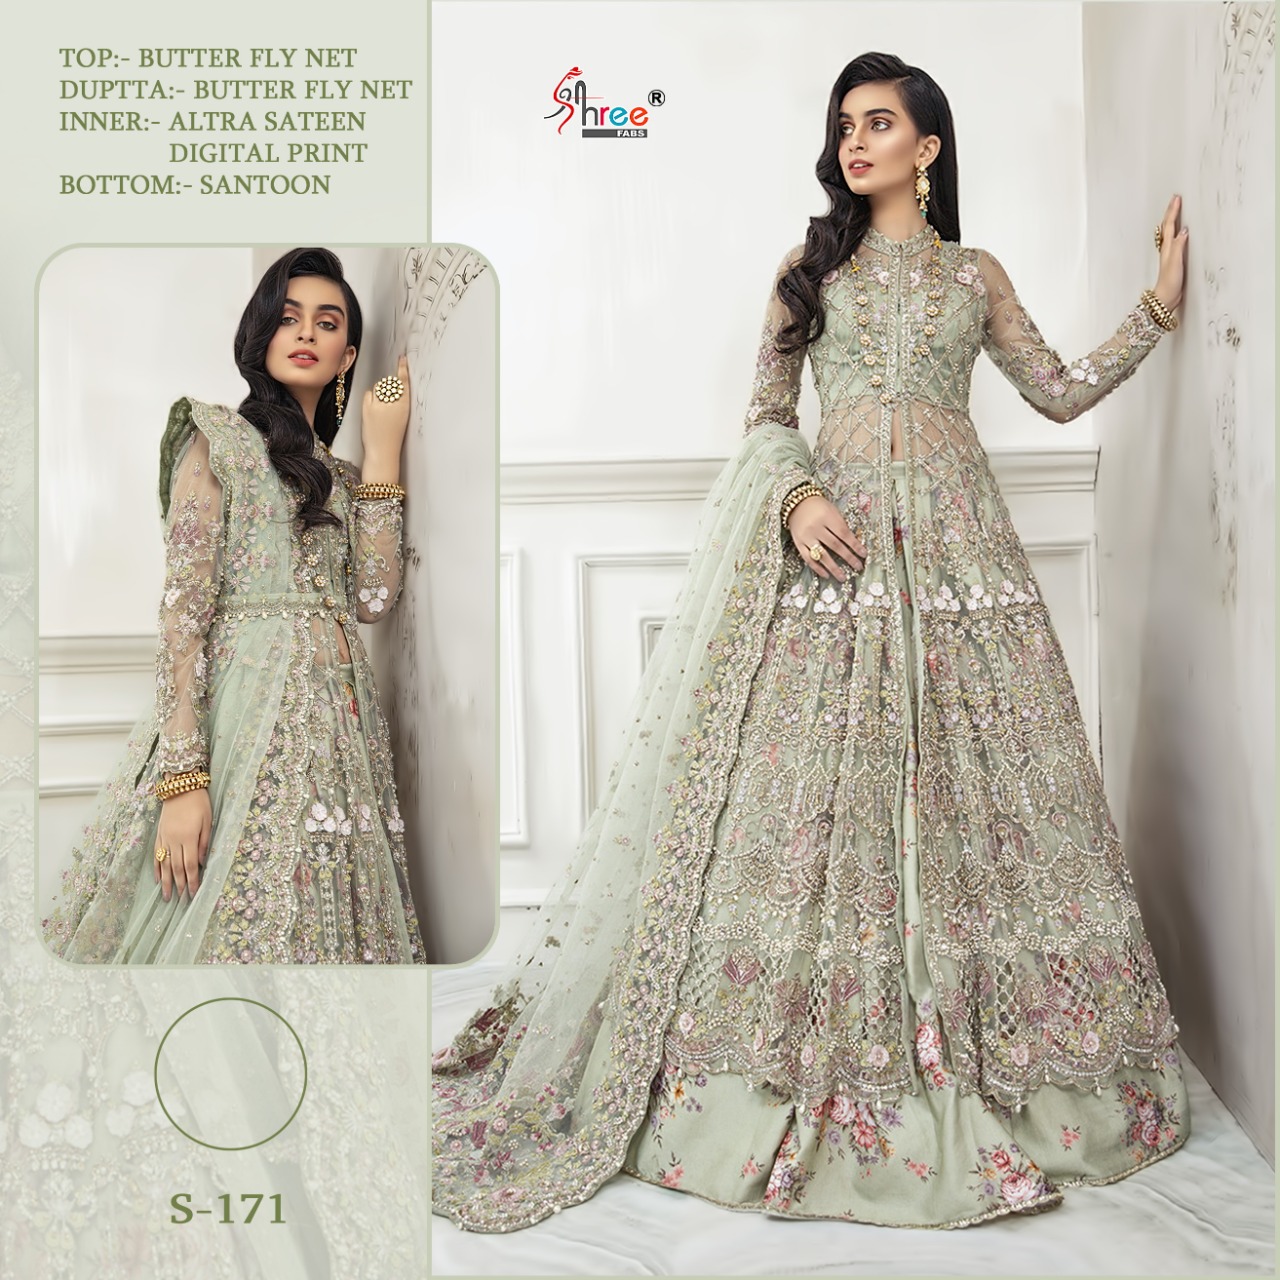 SHREE FABS S 171 PAKISTANI CLOTHING WITH FREE SHIPPING